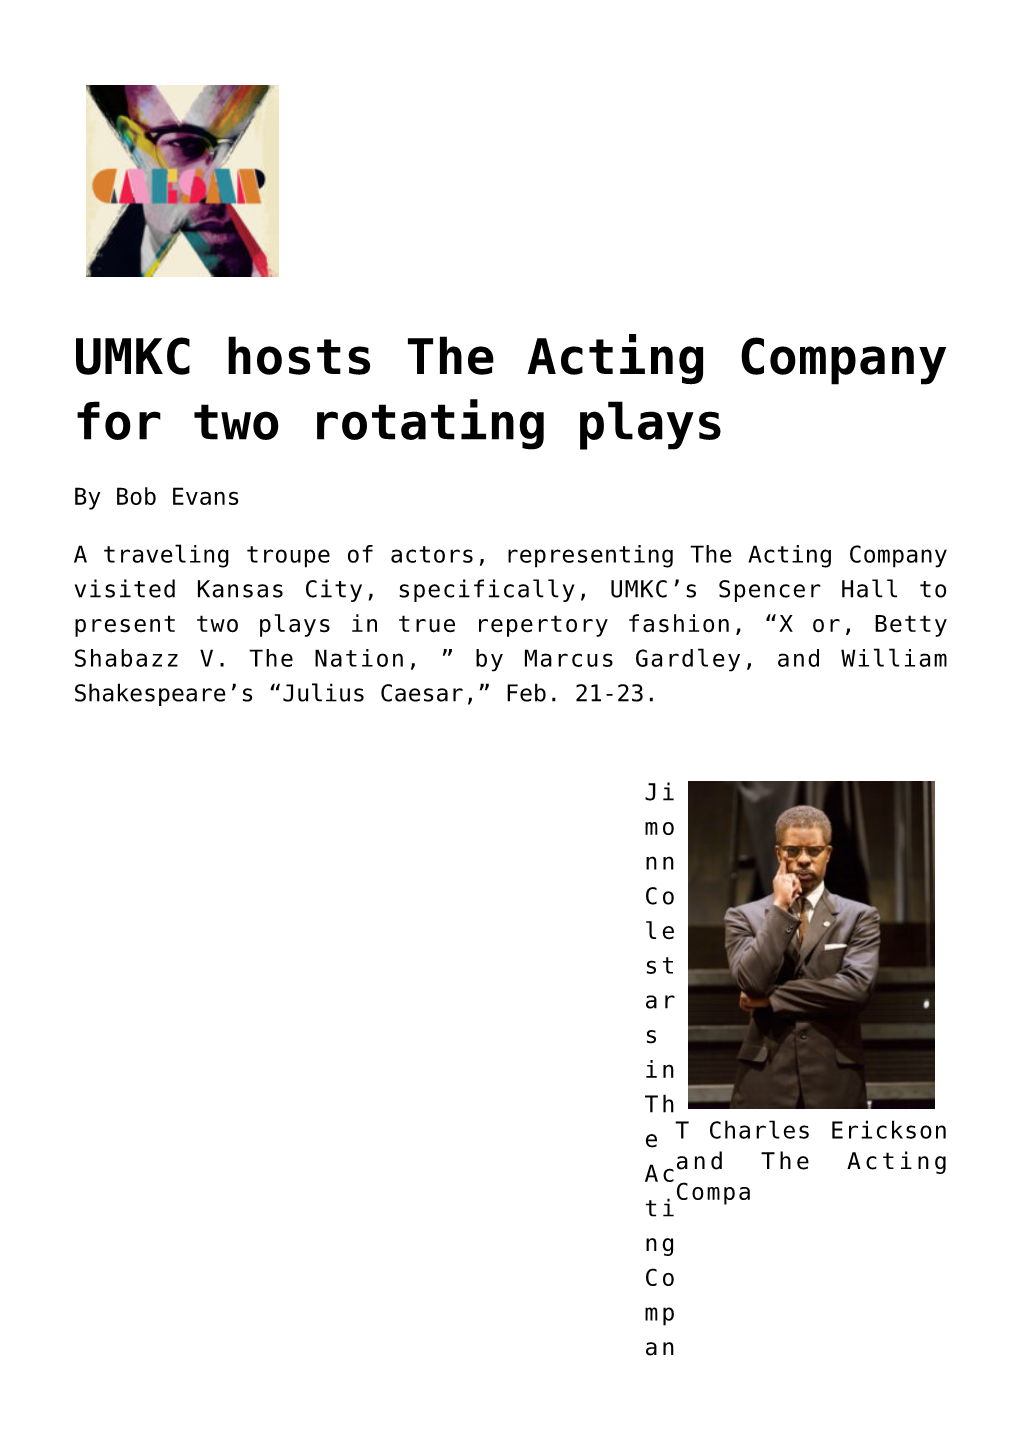 UMKC Hosts the Acting Company for Two Rotating Plays